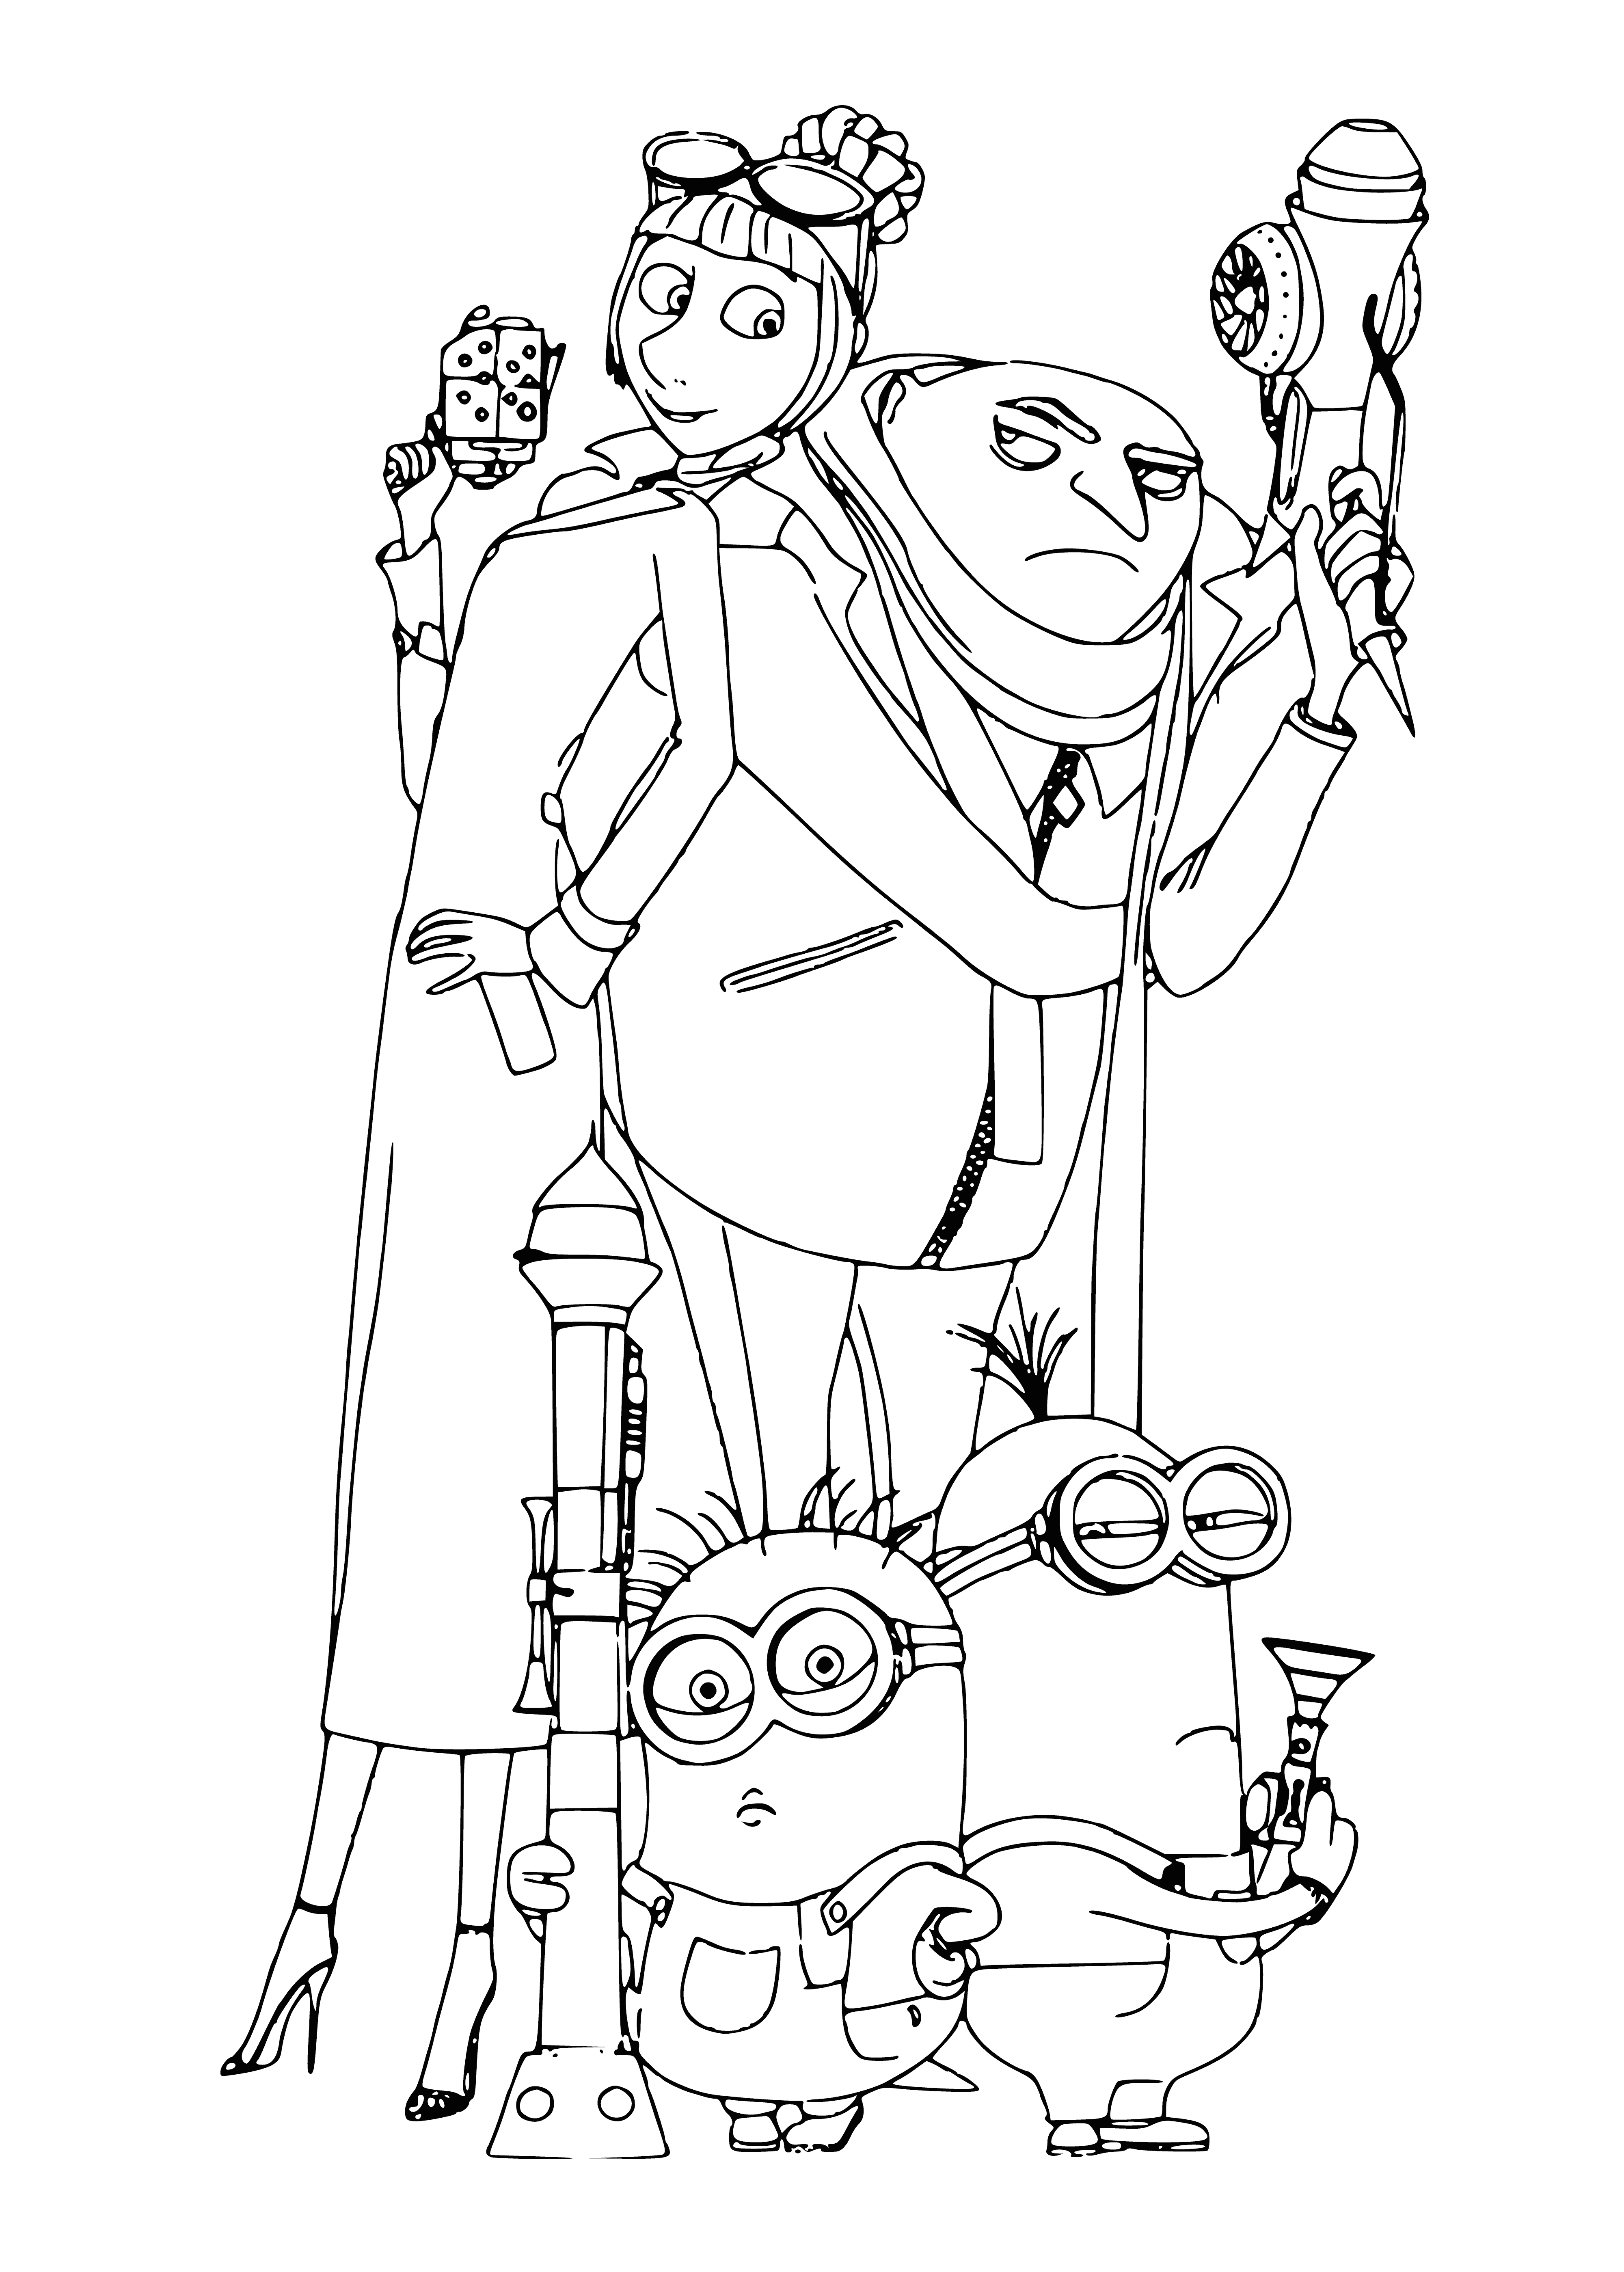 coloring page: Animated coloring page of minion from "Despicable Me" movies. Holding a heart in its hands. Background of yellow/orange gradient with "Despicable Me 2" written above.